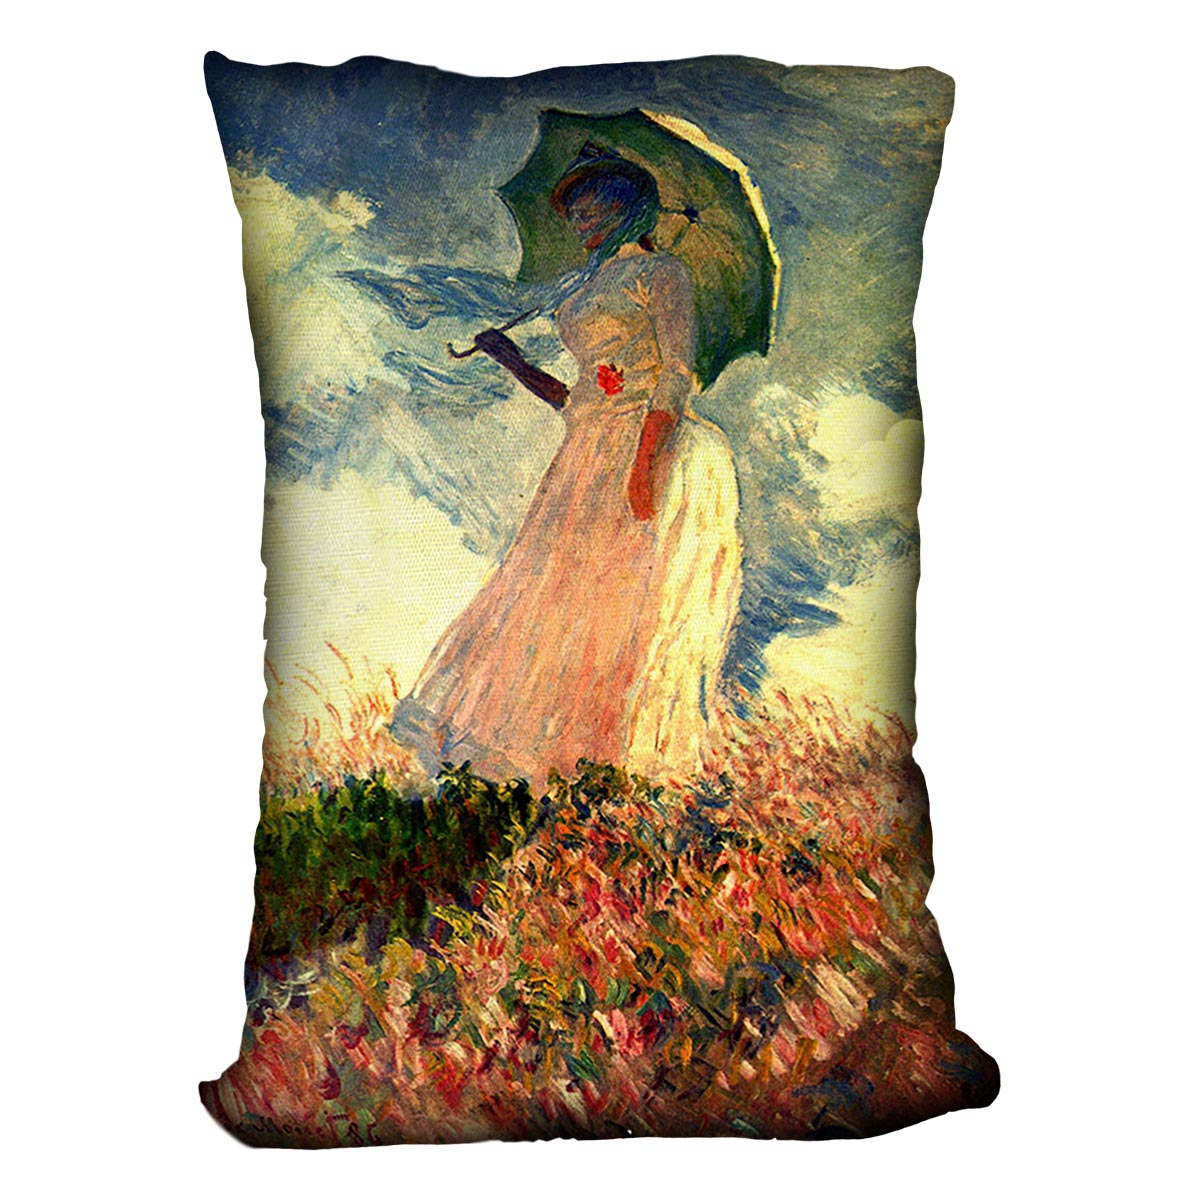 Woman with sunshade by Monet Cushion